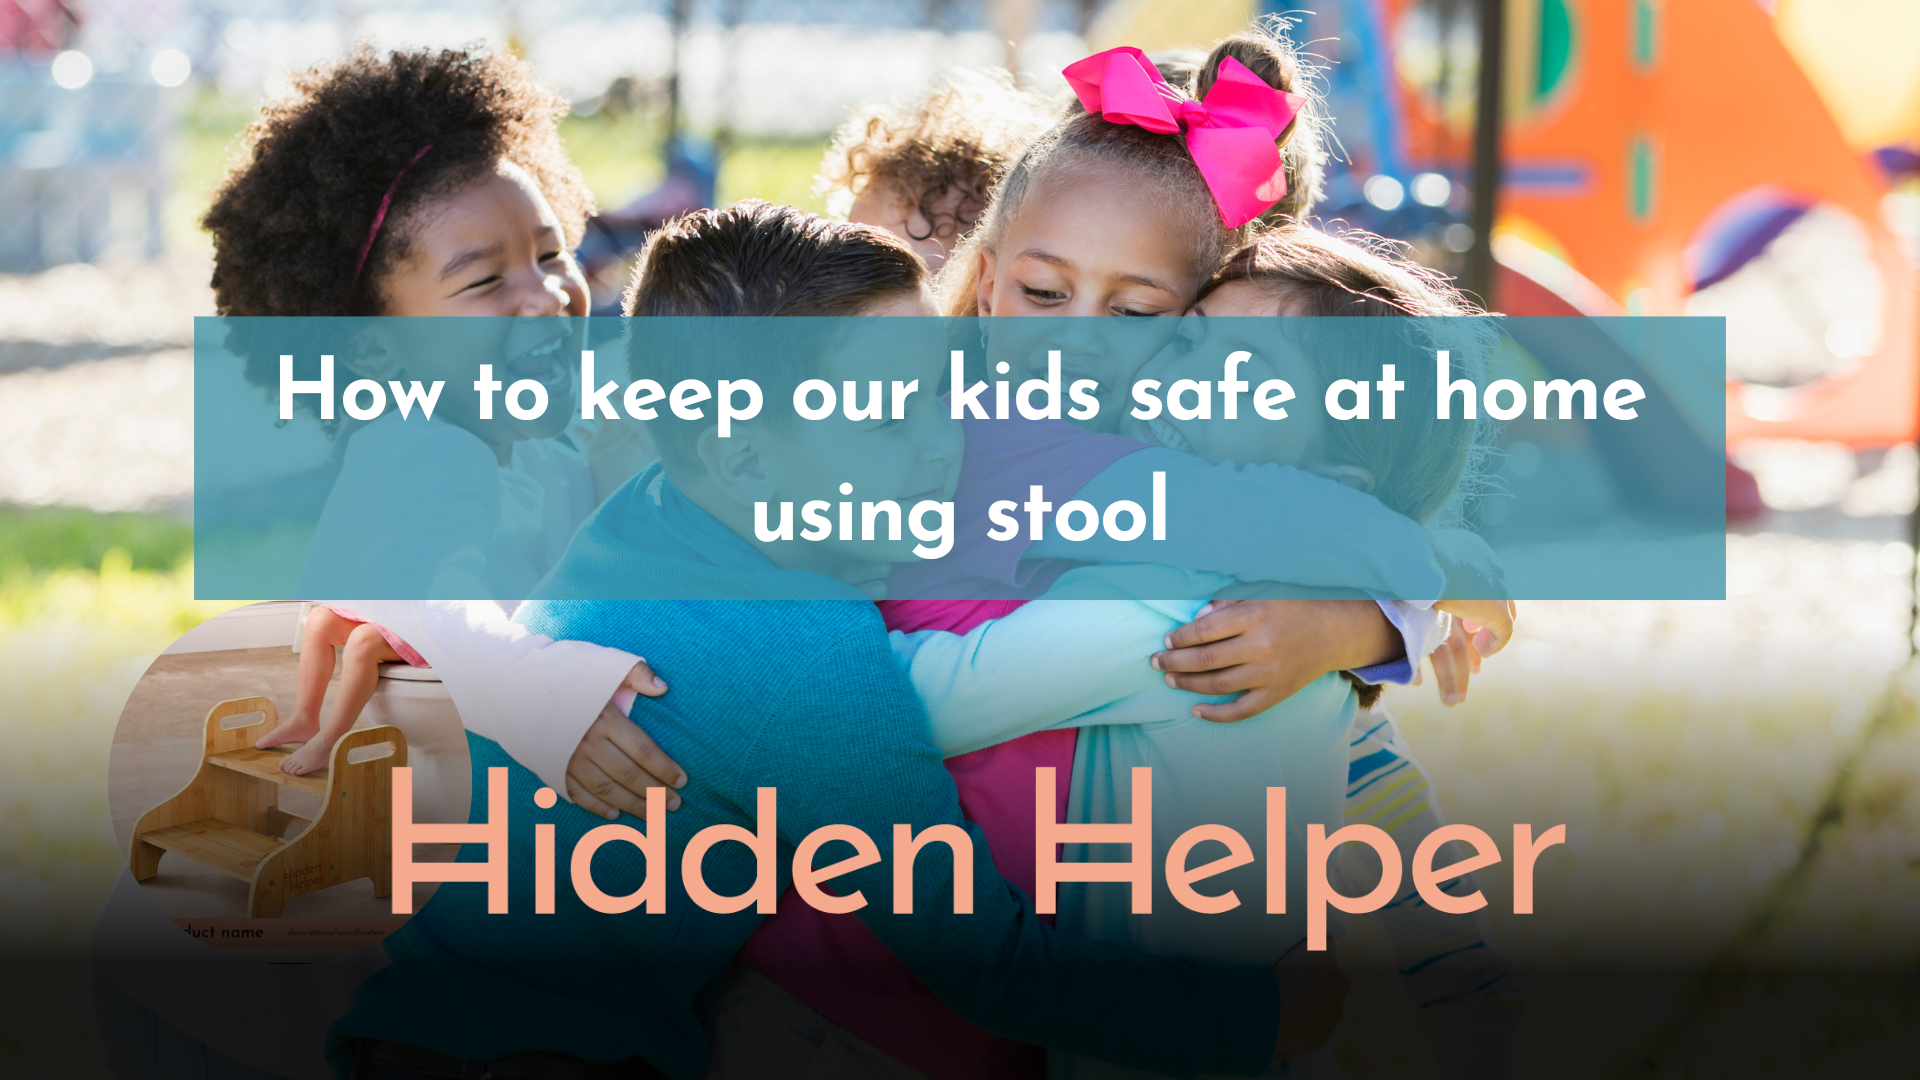  how to keep our kids safe at home using stool